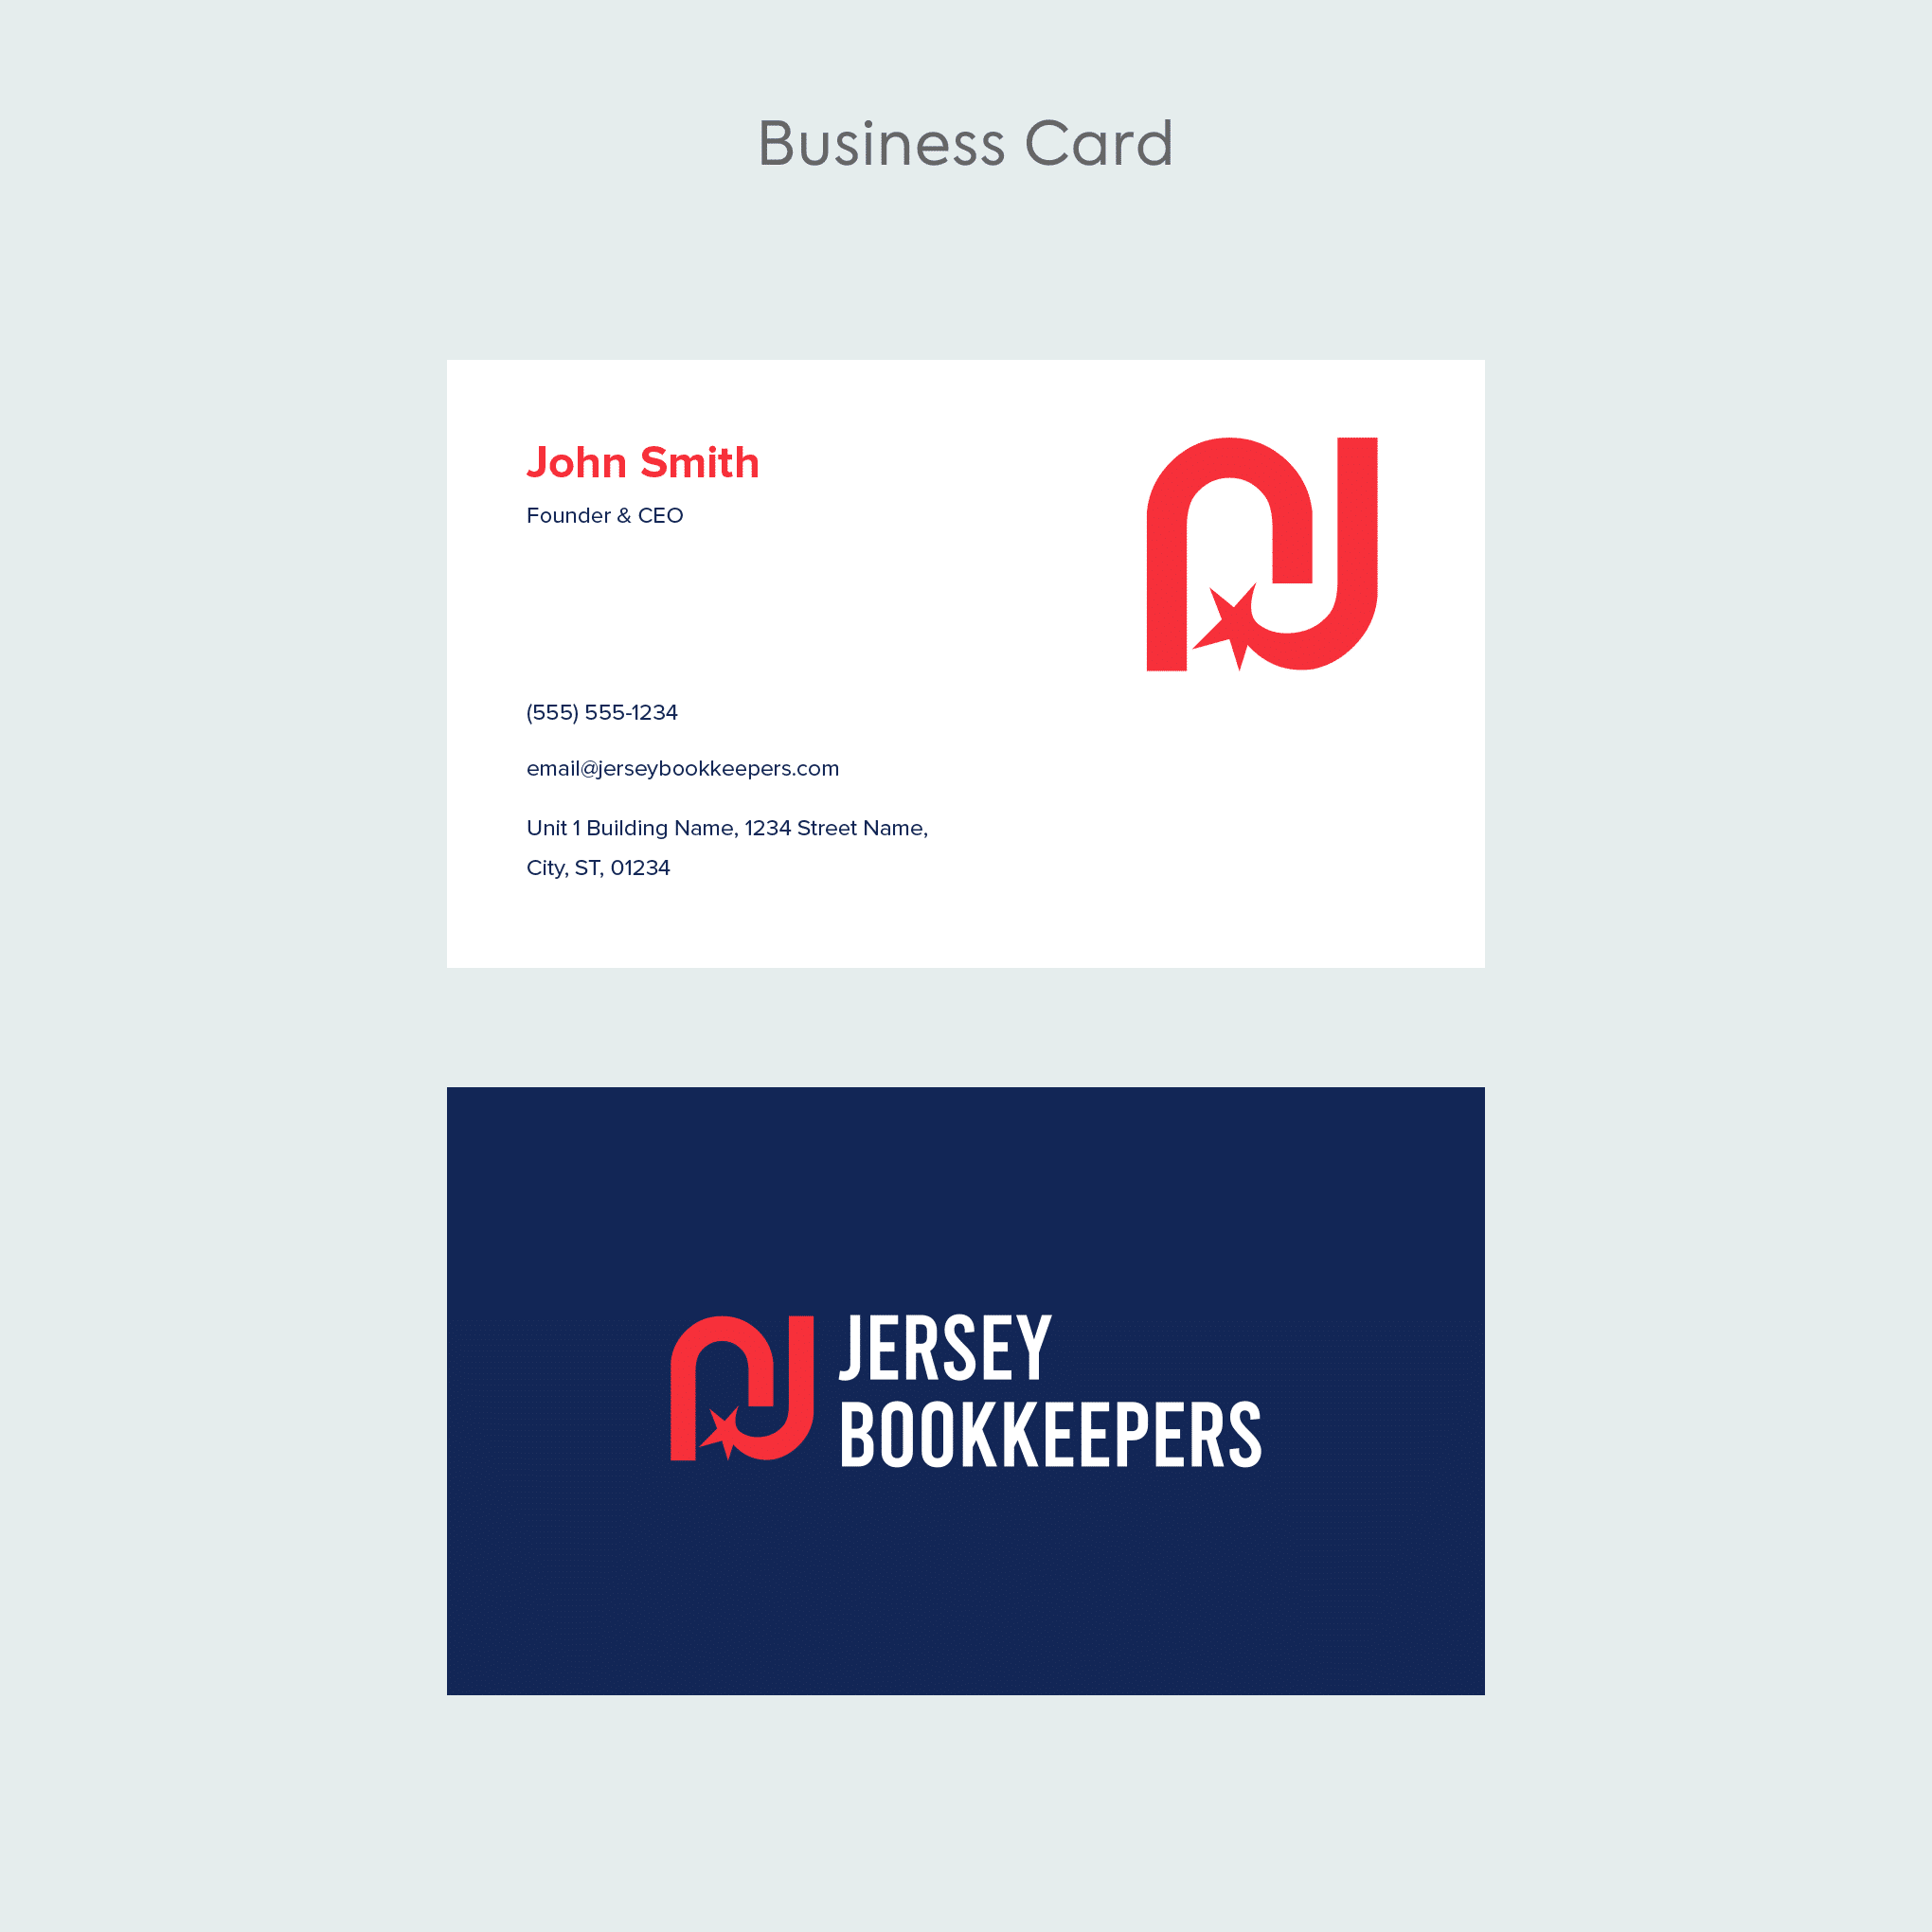 04 - Business Card Template (8)